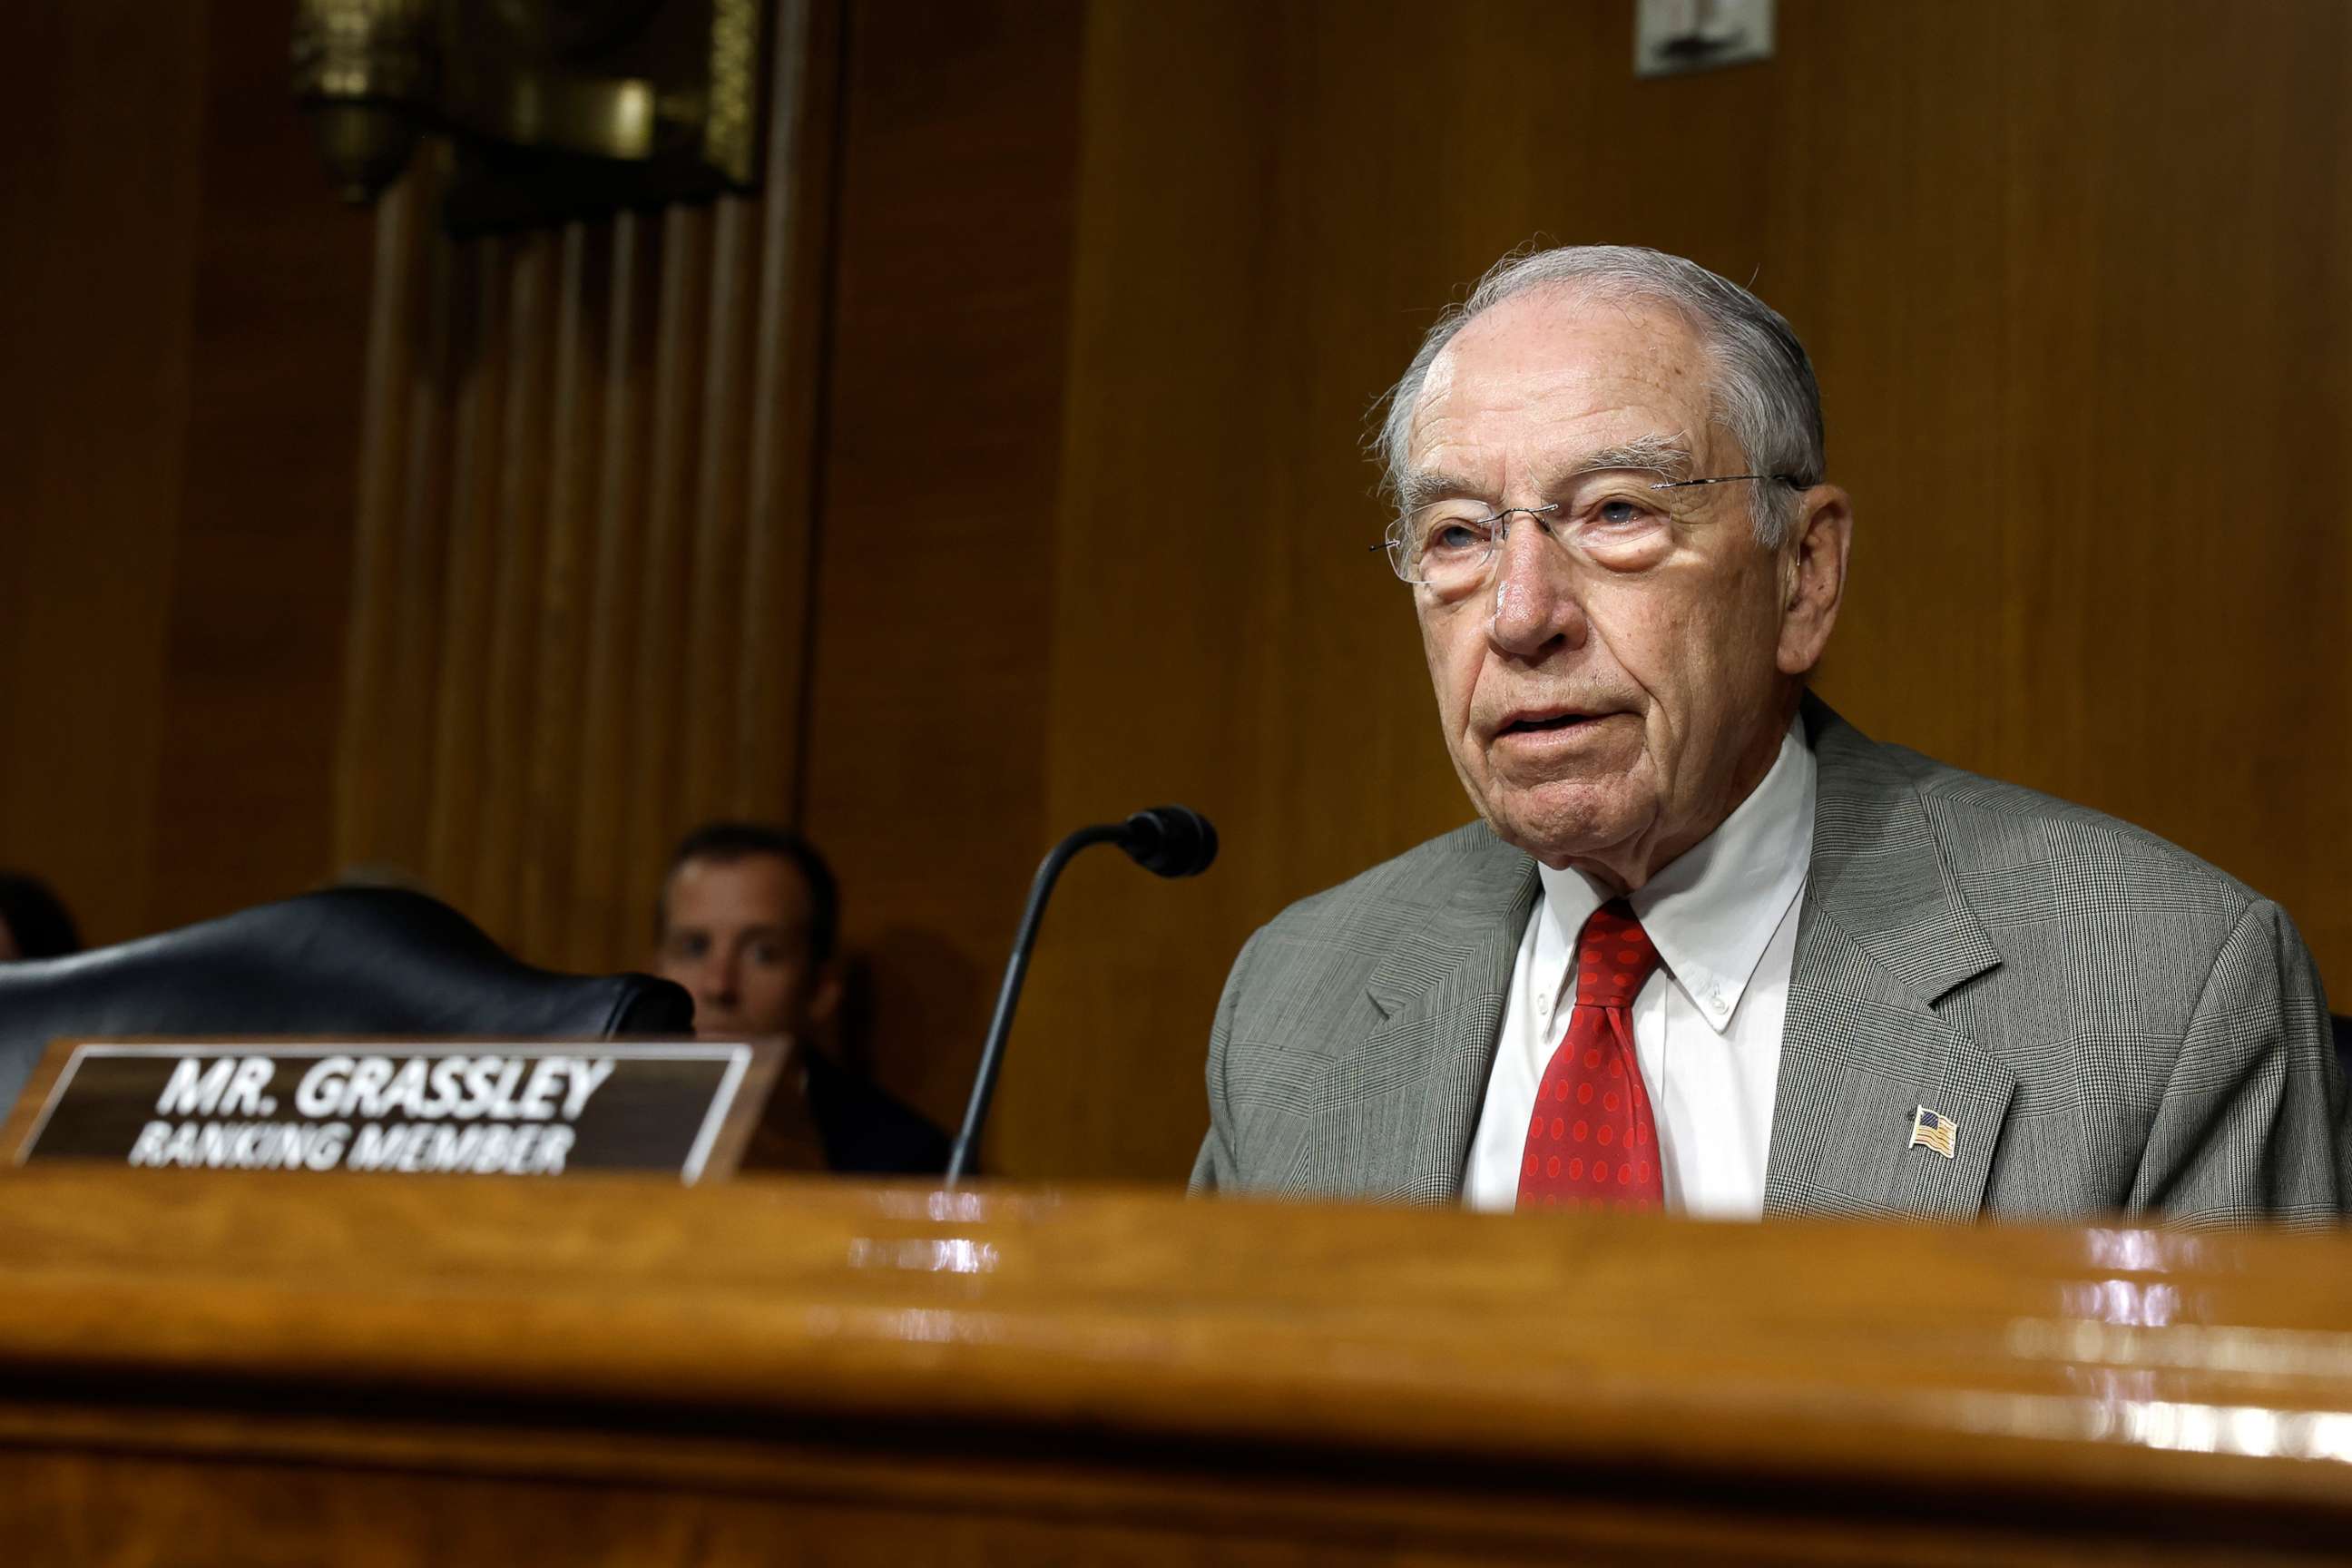 PHOTO: Senate Judiciary Ranking Member Chuck Grassley speaks at a hearing with the Senate Judiciary Committee in the Dirksen Senate Office Building on July 12, 2022 in Washington, D.C.